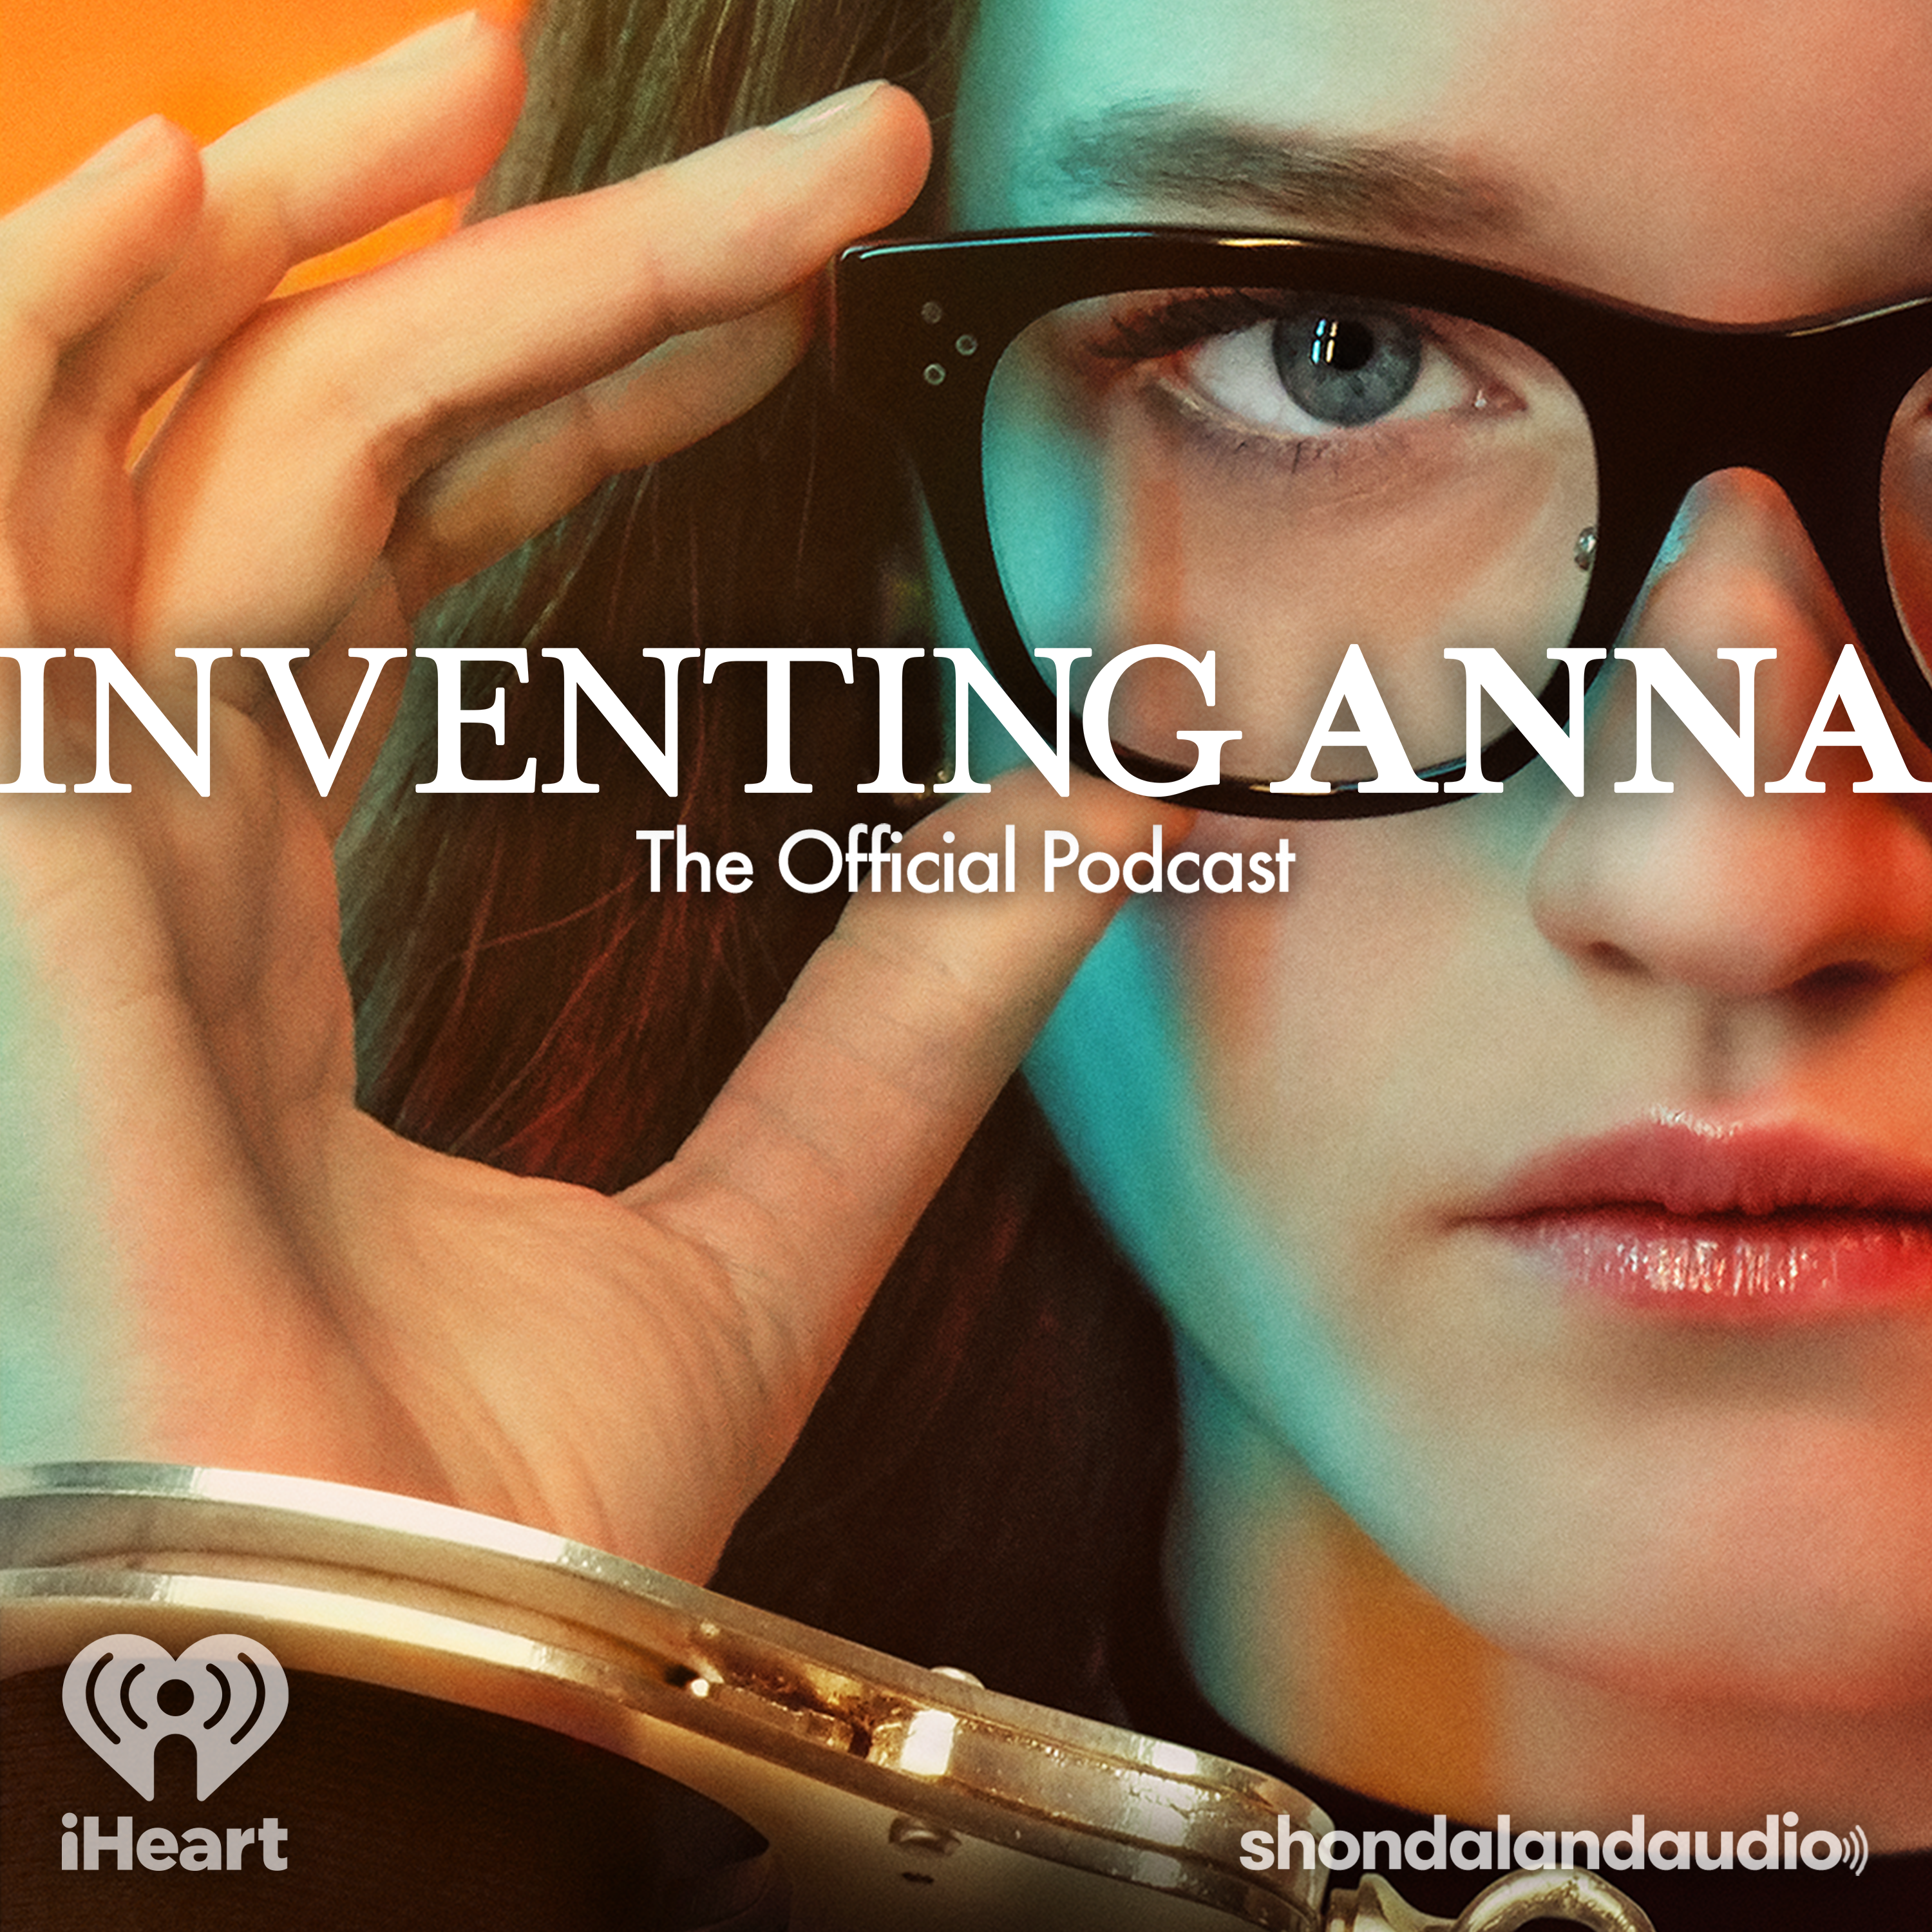 Coming soon...Inventing Anna: The Official Podcast